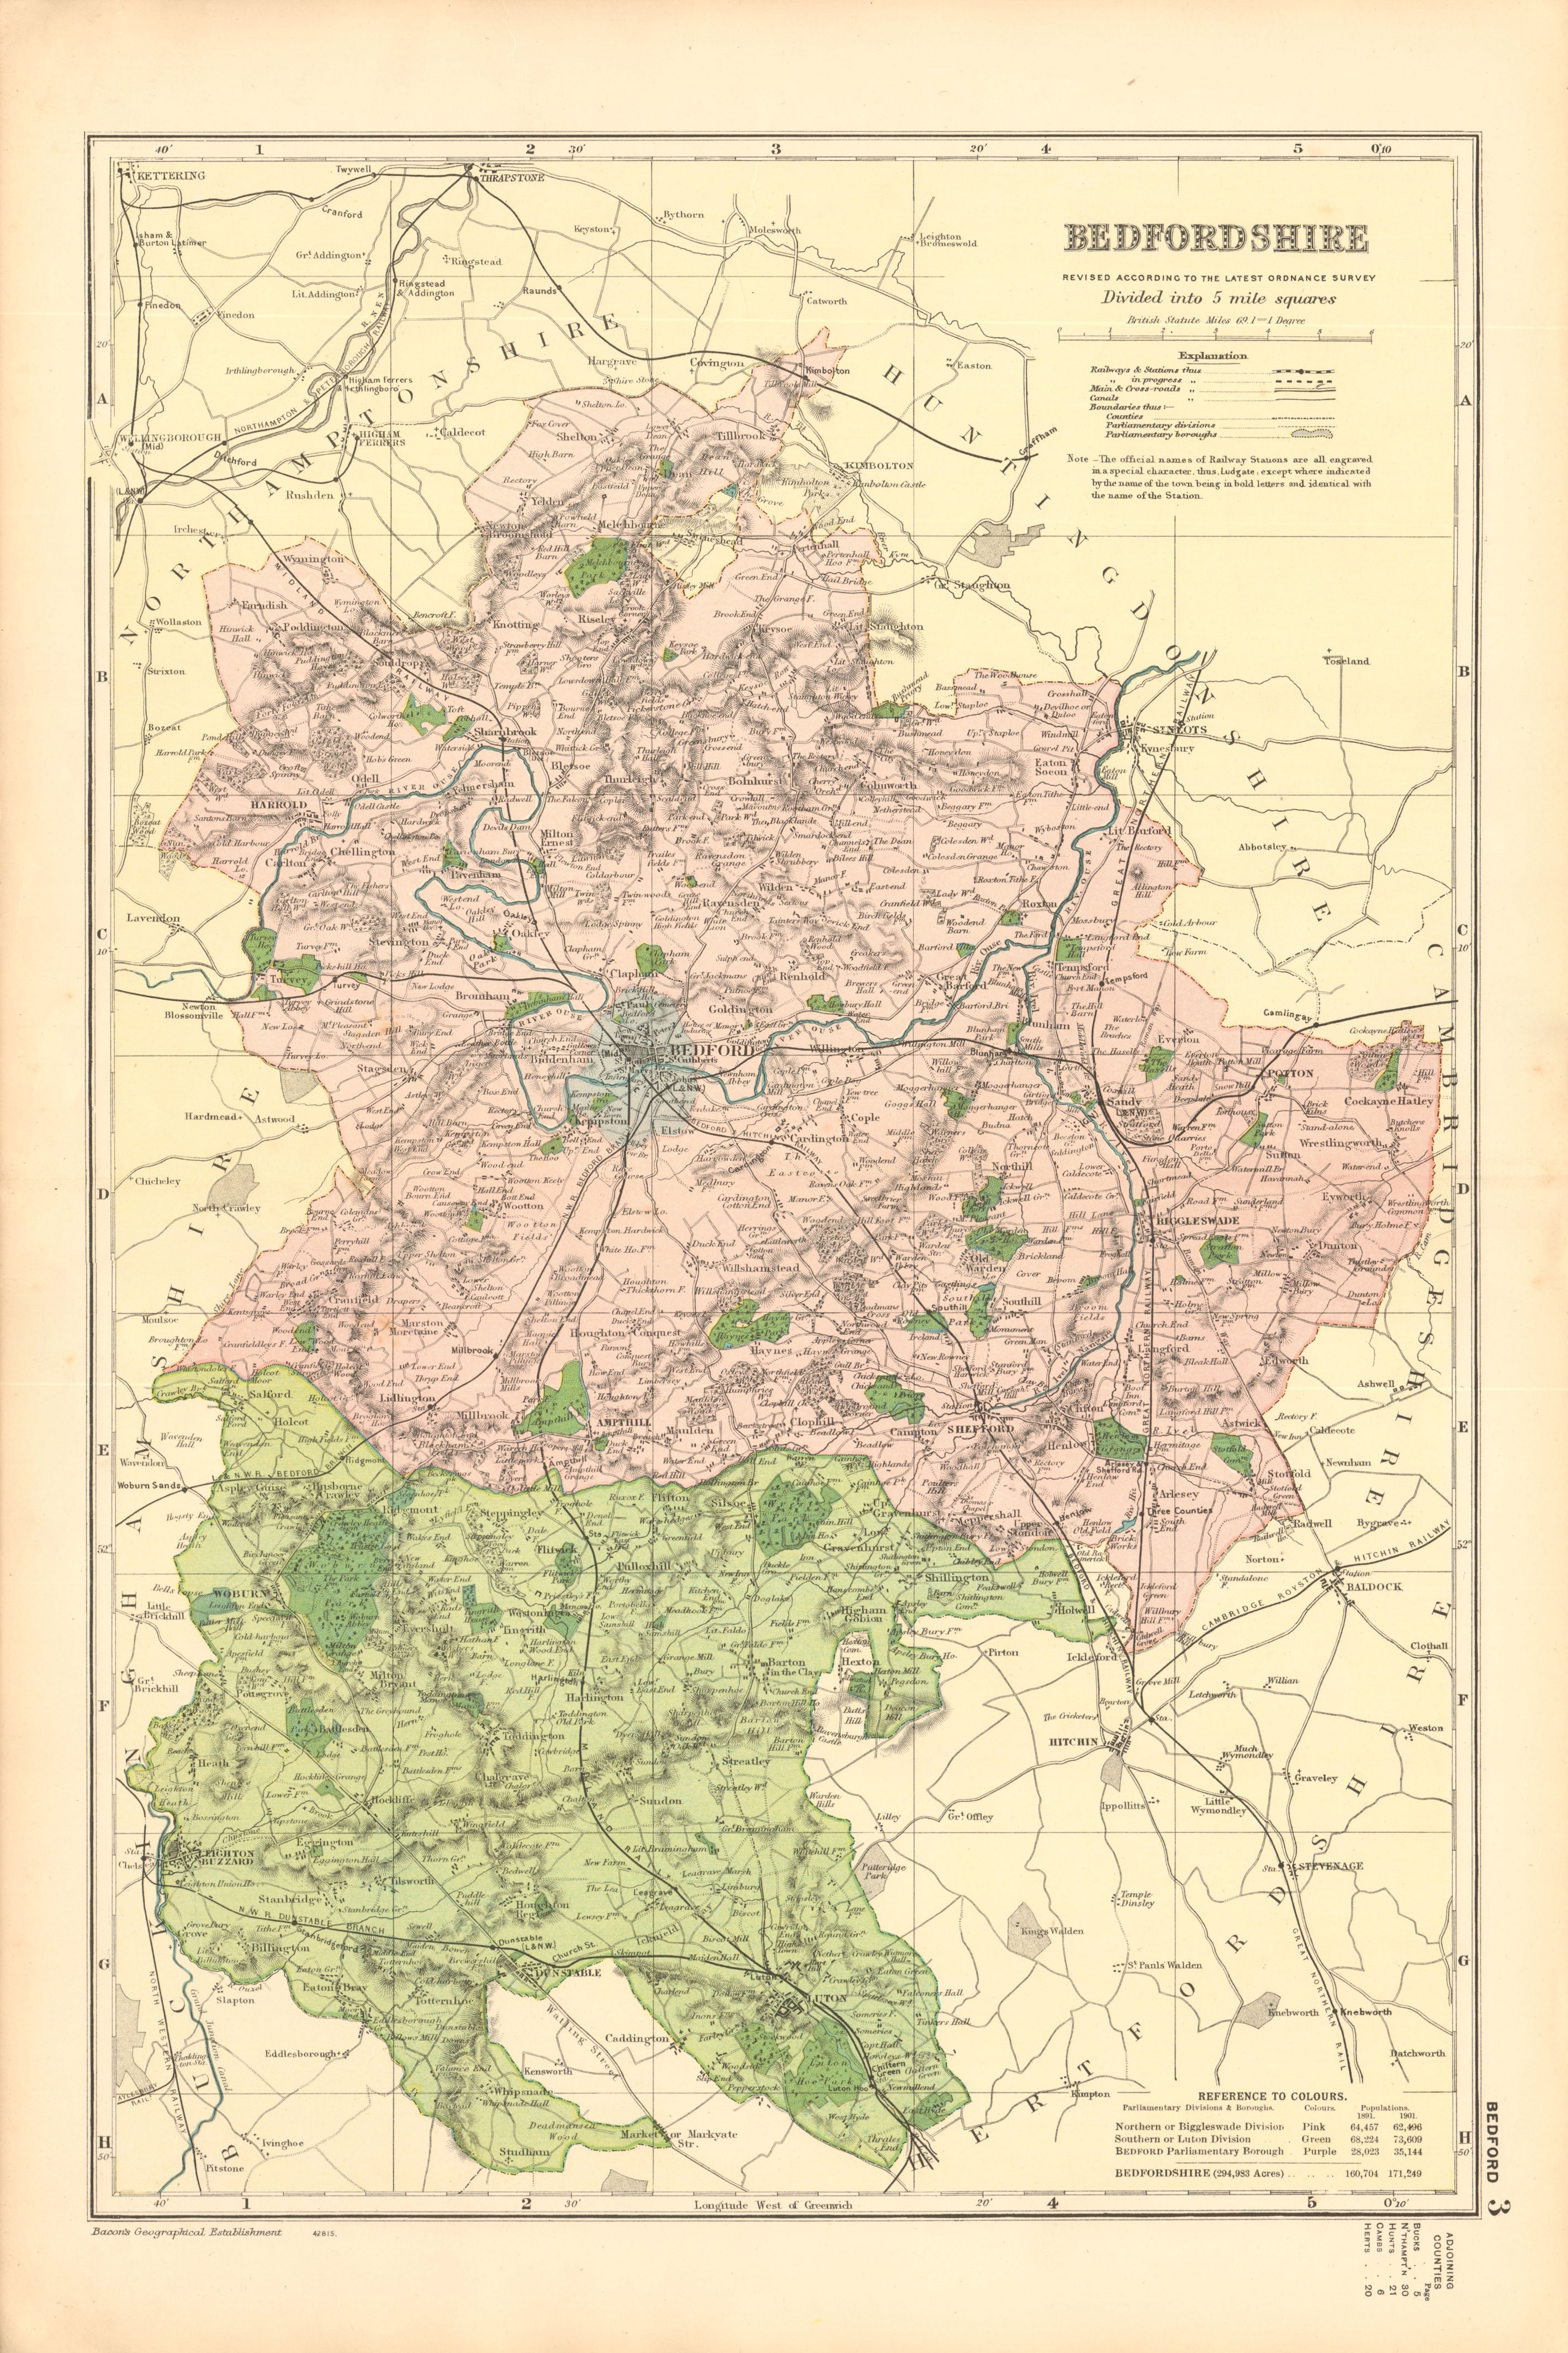 Associate Product BEDFORDSHIRE. Showing Parliamentary divisions, boroughs & parks. BACON 1904 map